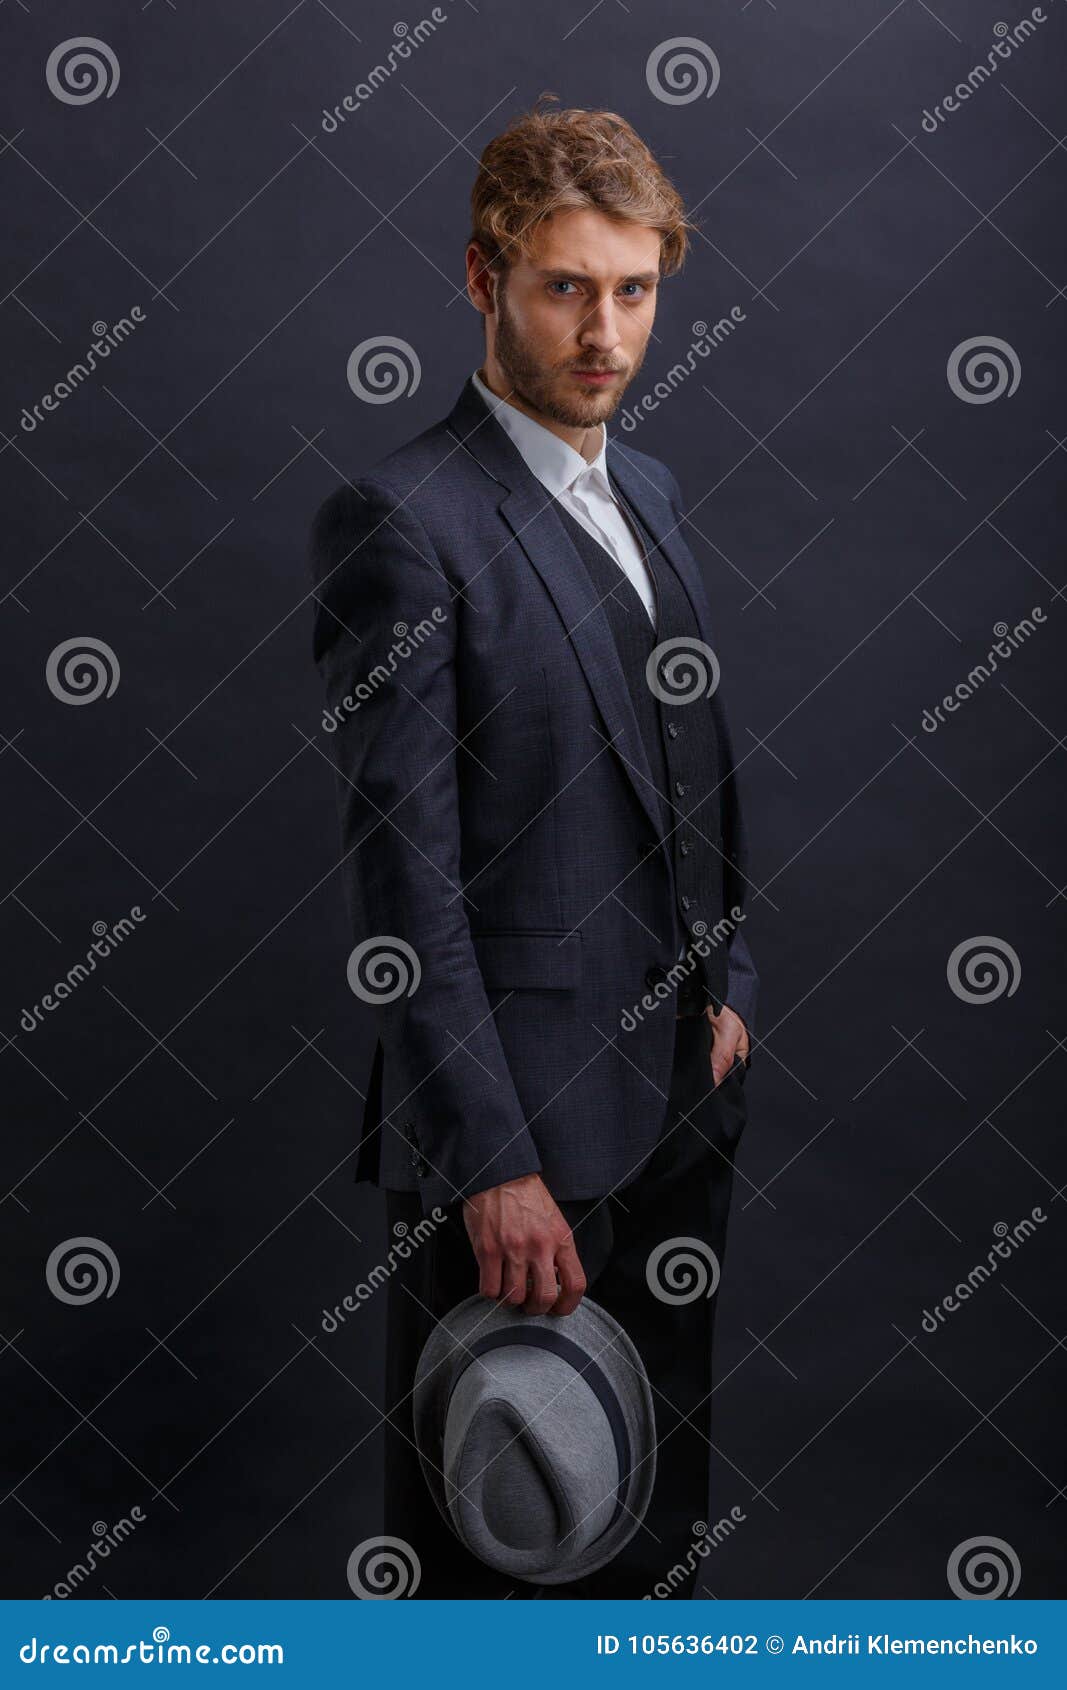 A Man in a Suit, Stands with a Serious Look and Holds a Hat in His ...